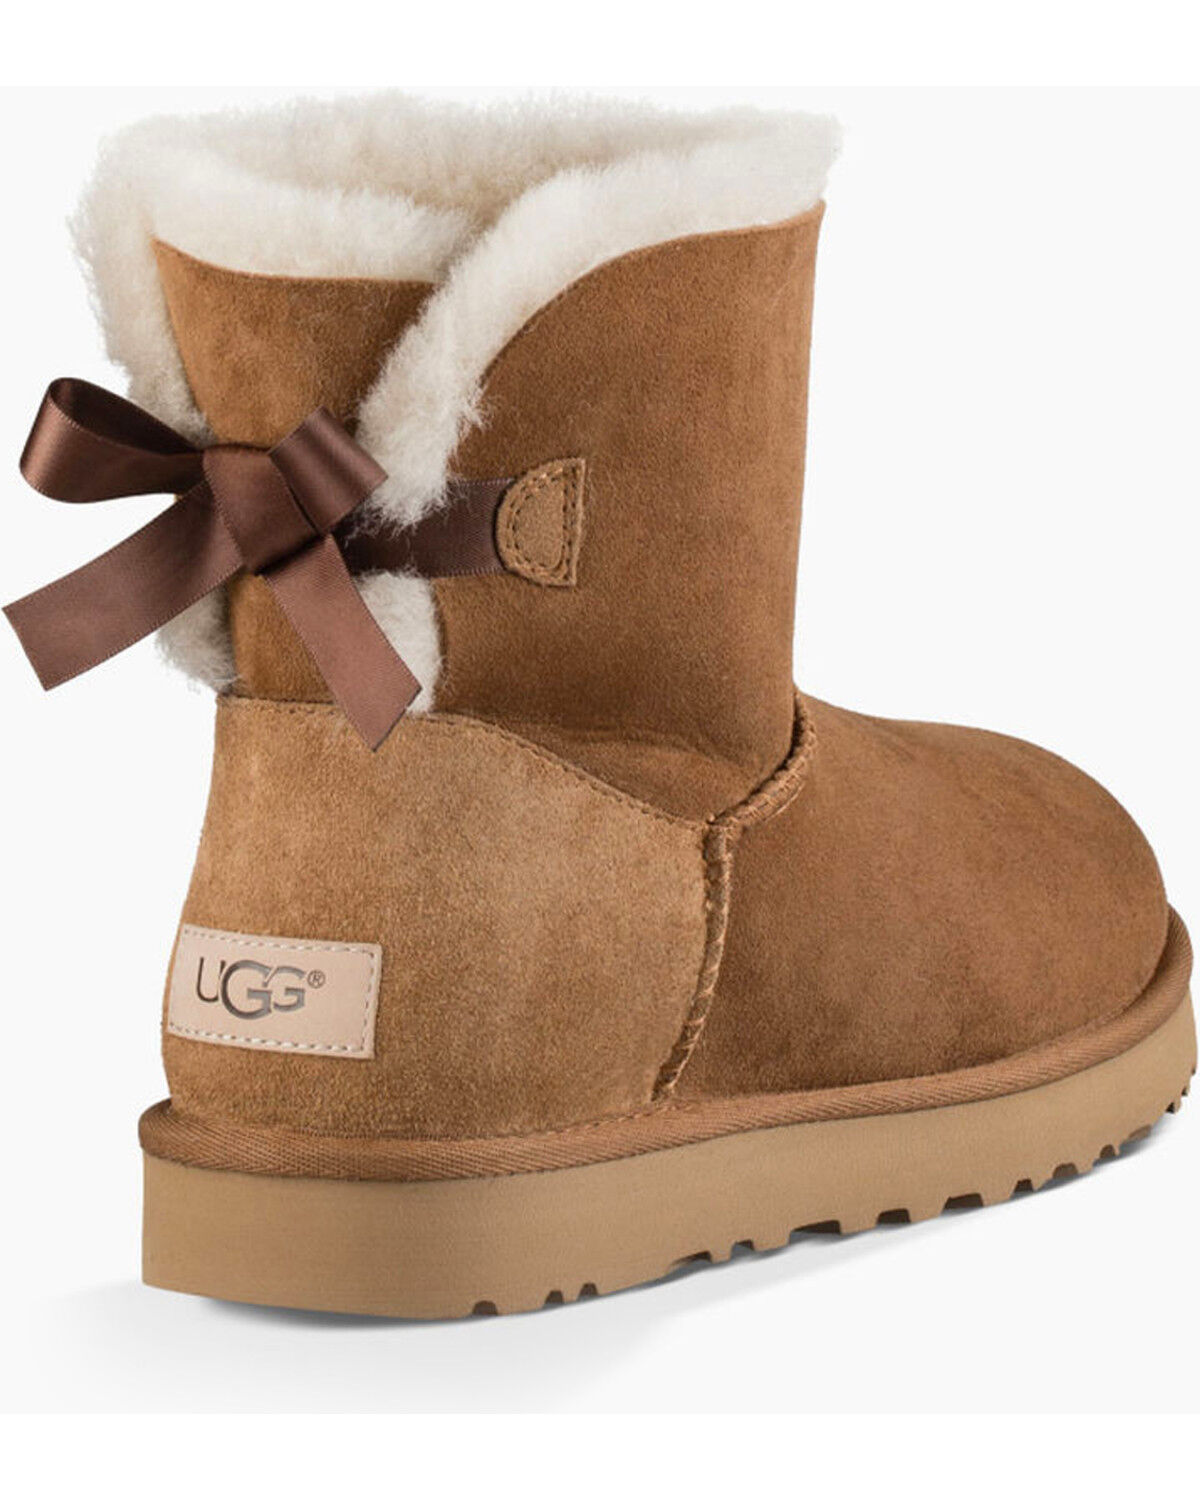 black uggs with ribbons on the back